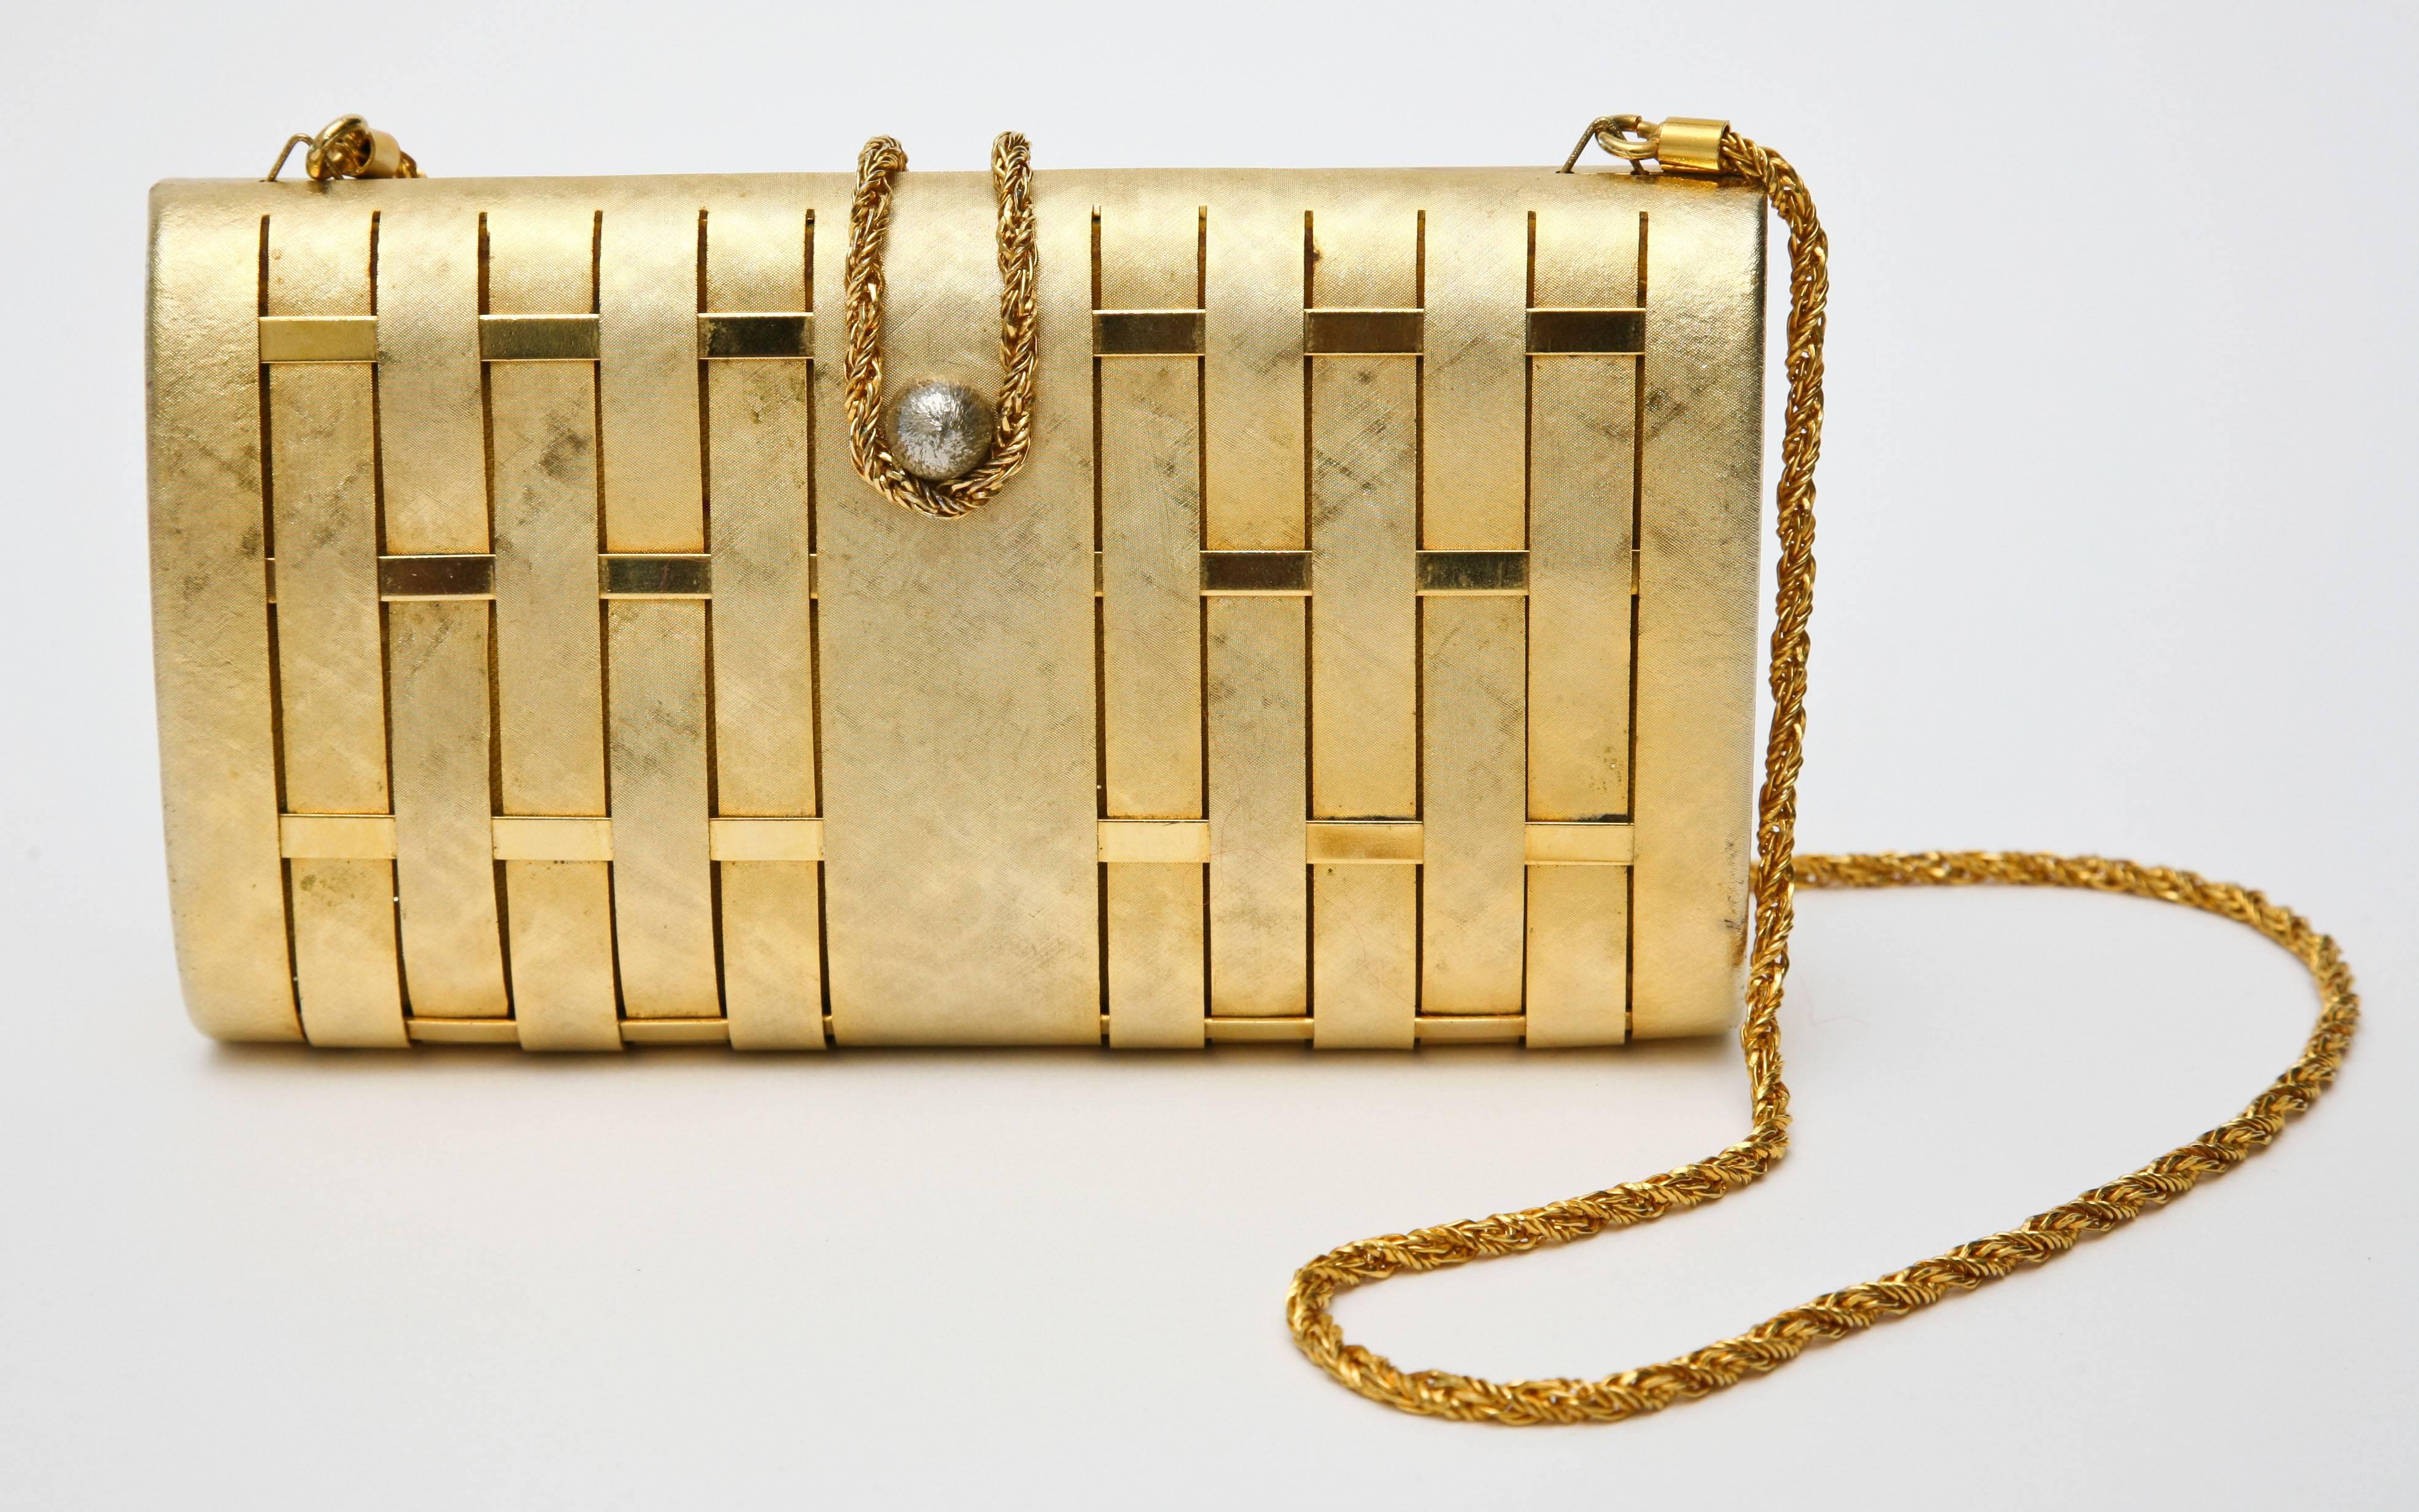  Gold Structured Evening Clutch French Vintage 5